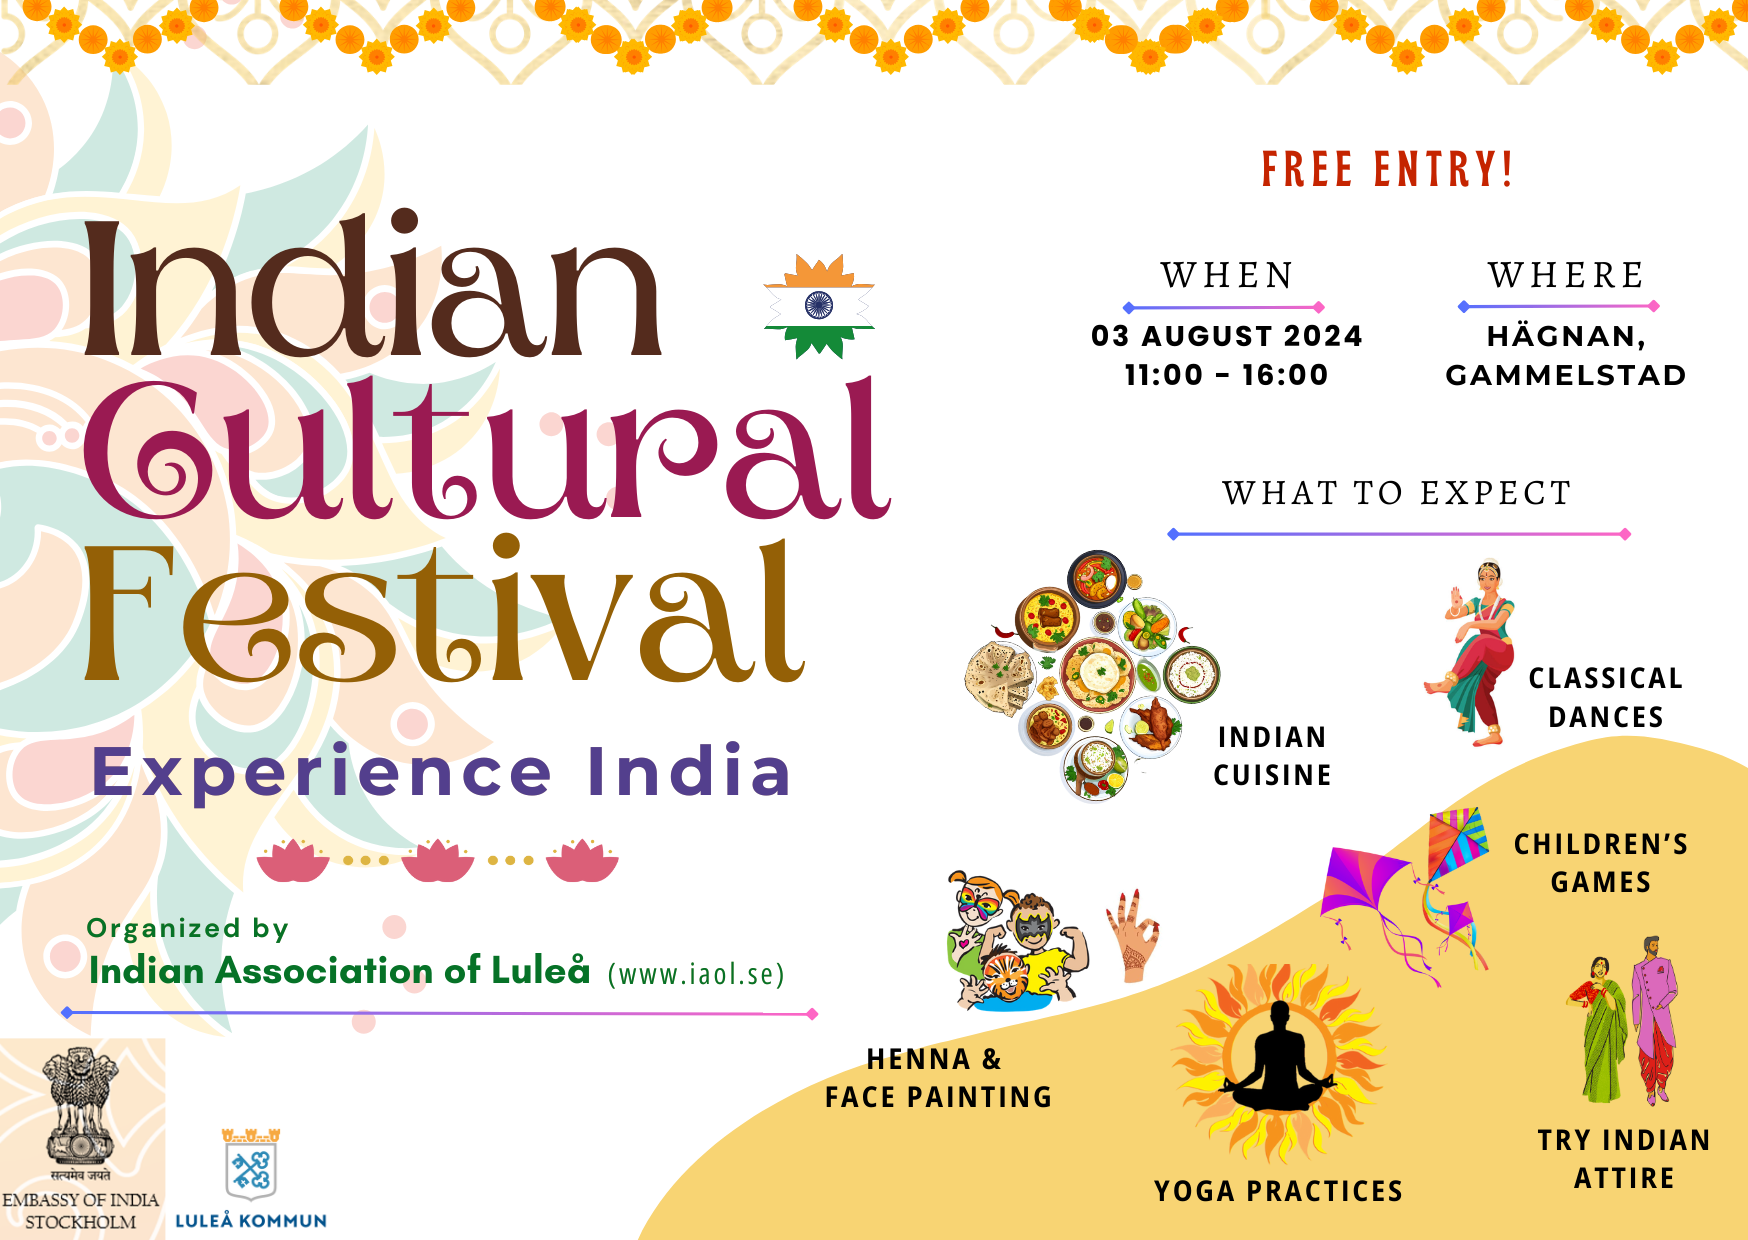 Poster. Indian Cultural Festival. Experience India. Organized by Indian Association of Luleå (www.iaol.se). August 3rd 2024, 11:00-16:00 at Hägnan in Gammelstad. Free entry. The poster is decorated with illustrated pictures of indian cousine, classical dances, kite flying, indian attire, yoga practice, henna tottoos and face paintings. 